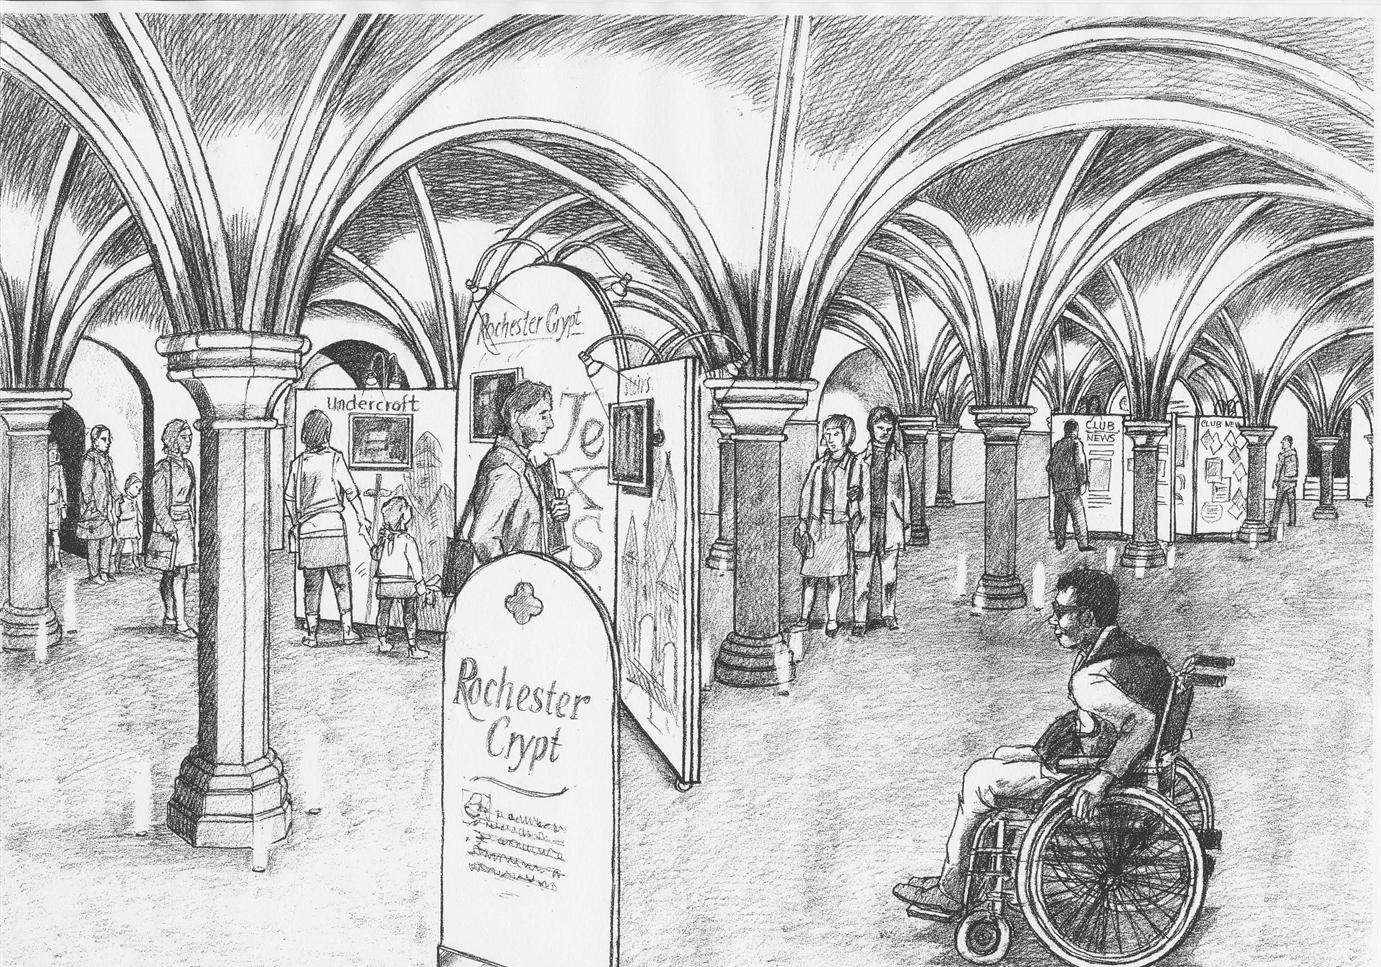 Artists' impressions of the proposed exhibition in Rochester Cathedral's crypt